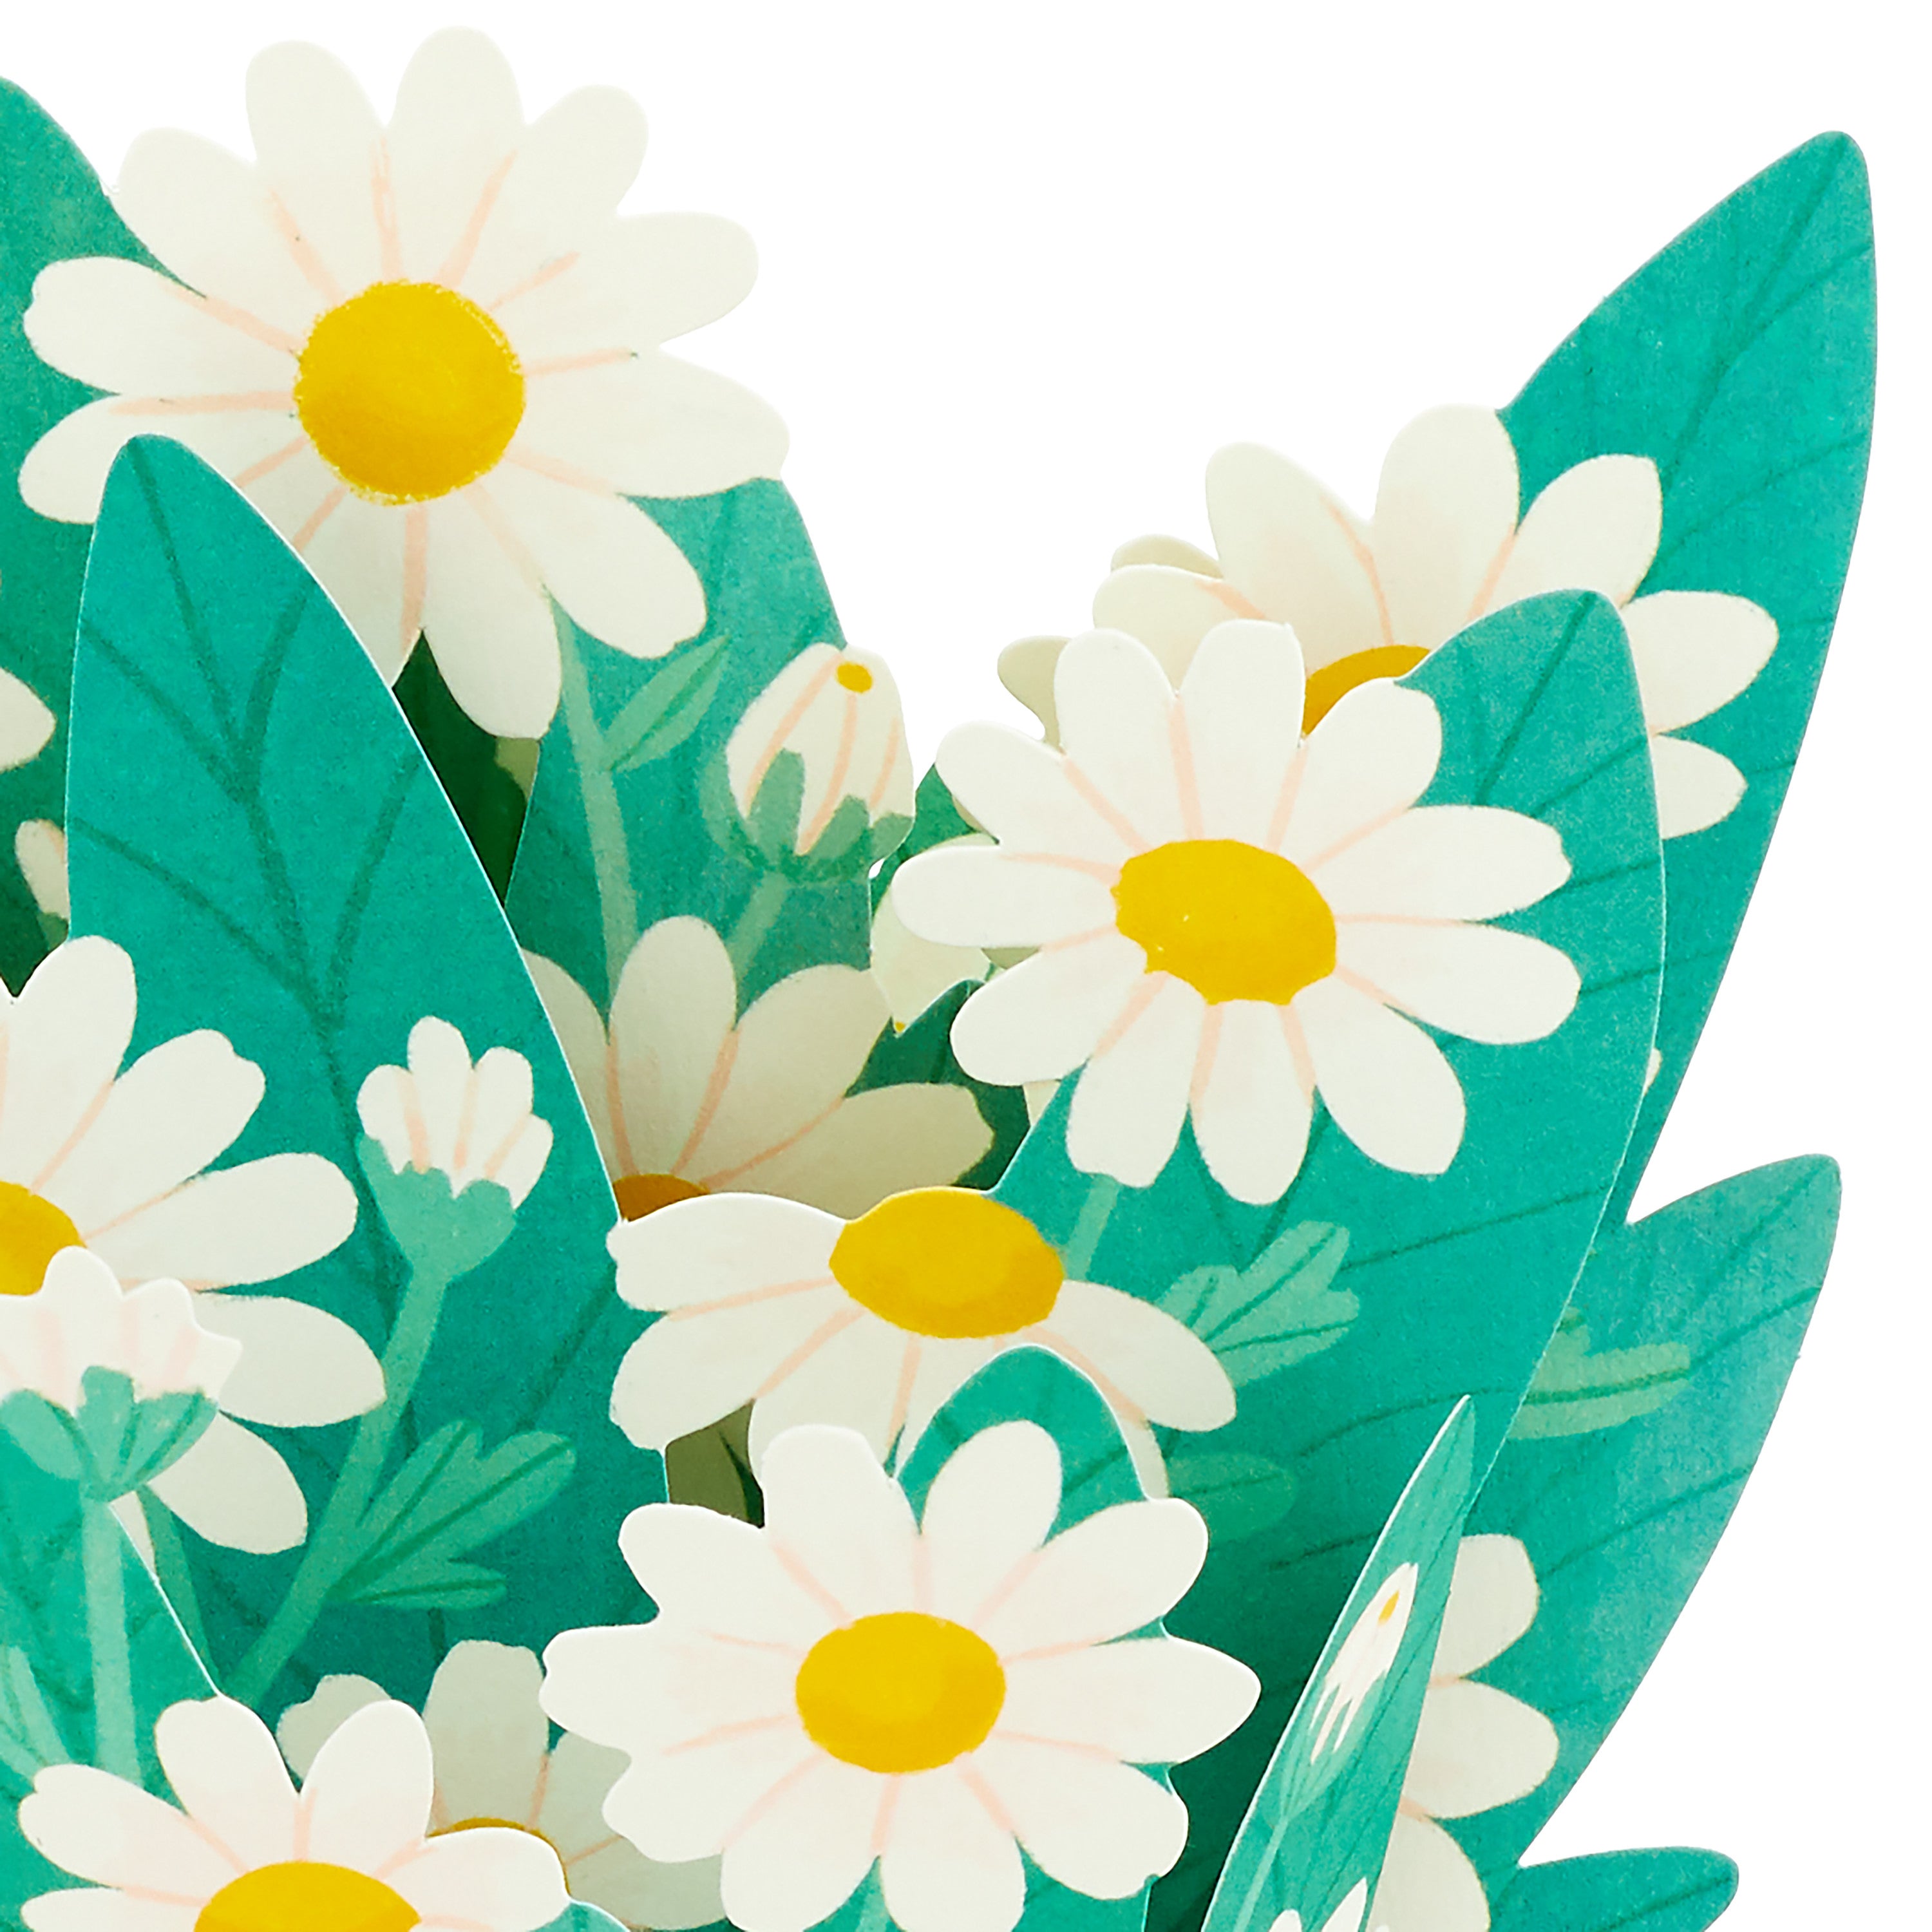 Paper Wonder Displayable Pop Up Mothers Day Card for Mom (Daisy Bouquet)